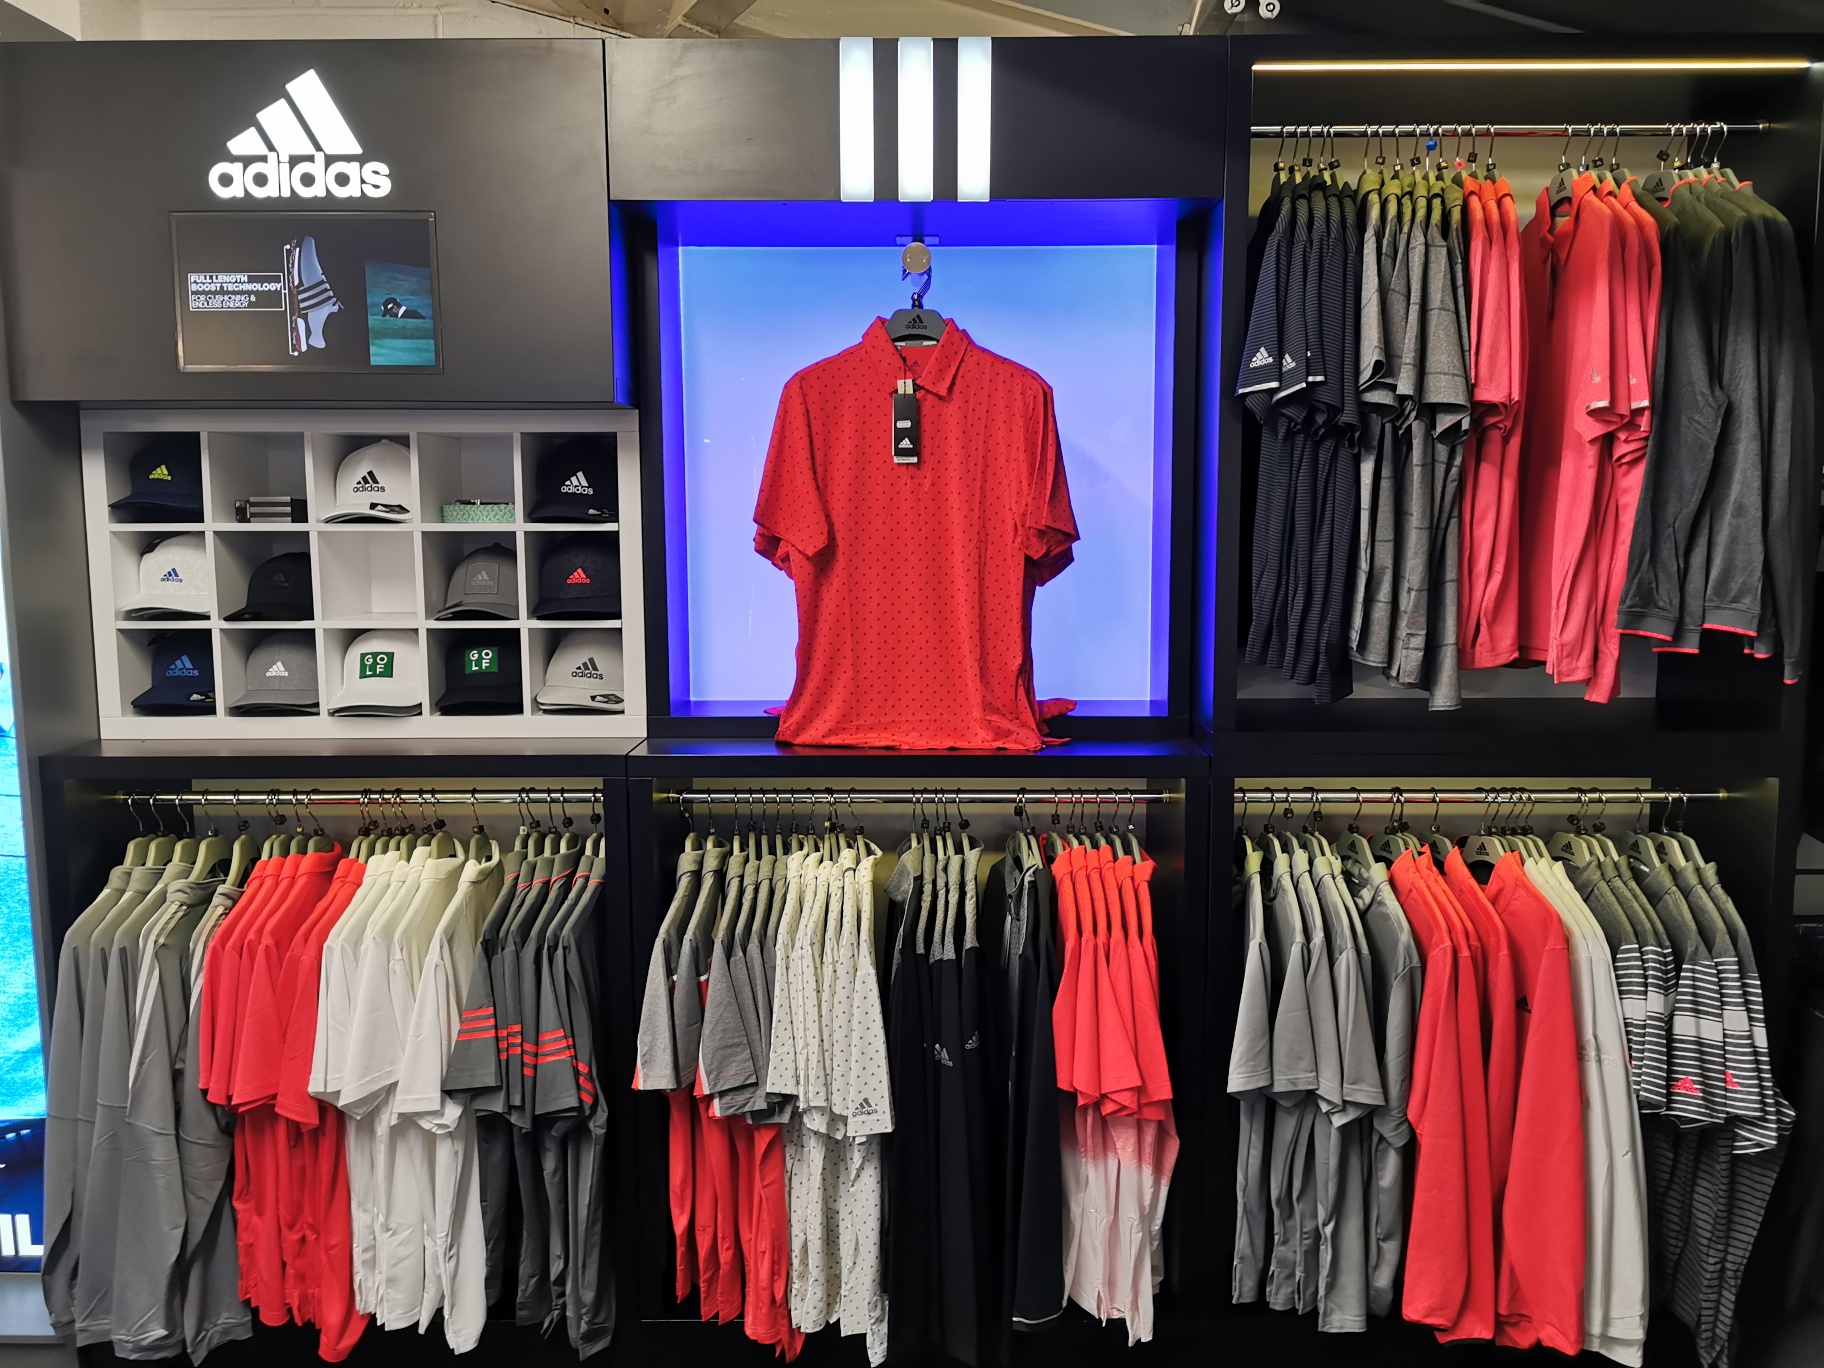 Tony Valentine Golf Twitter: "Brand New 2020 Range of adidas Golf and Calvin Klein clothing now in-store! Come in-store and it out, available at Corsham and Swindon (calvin klein available